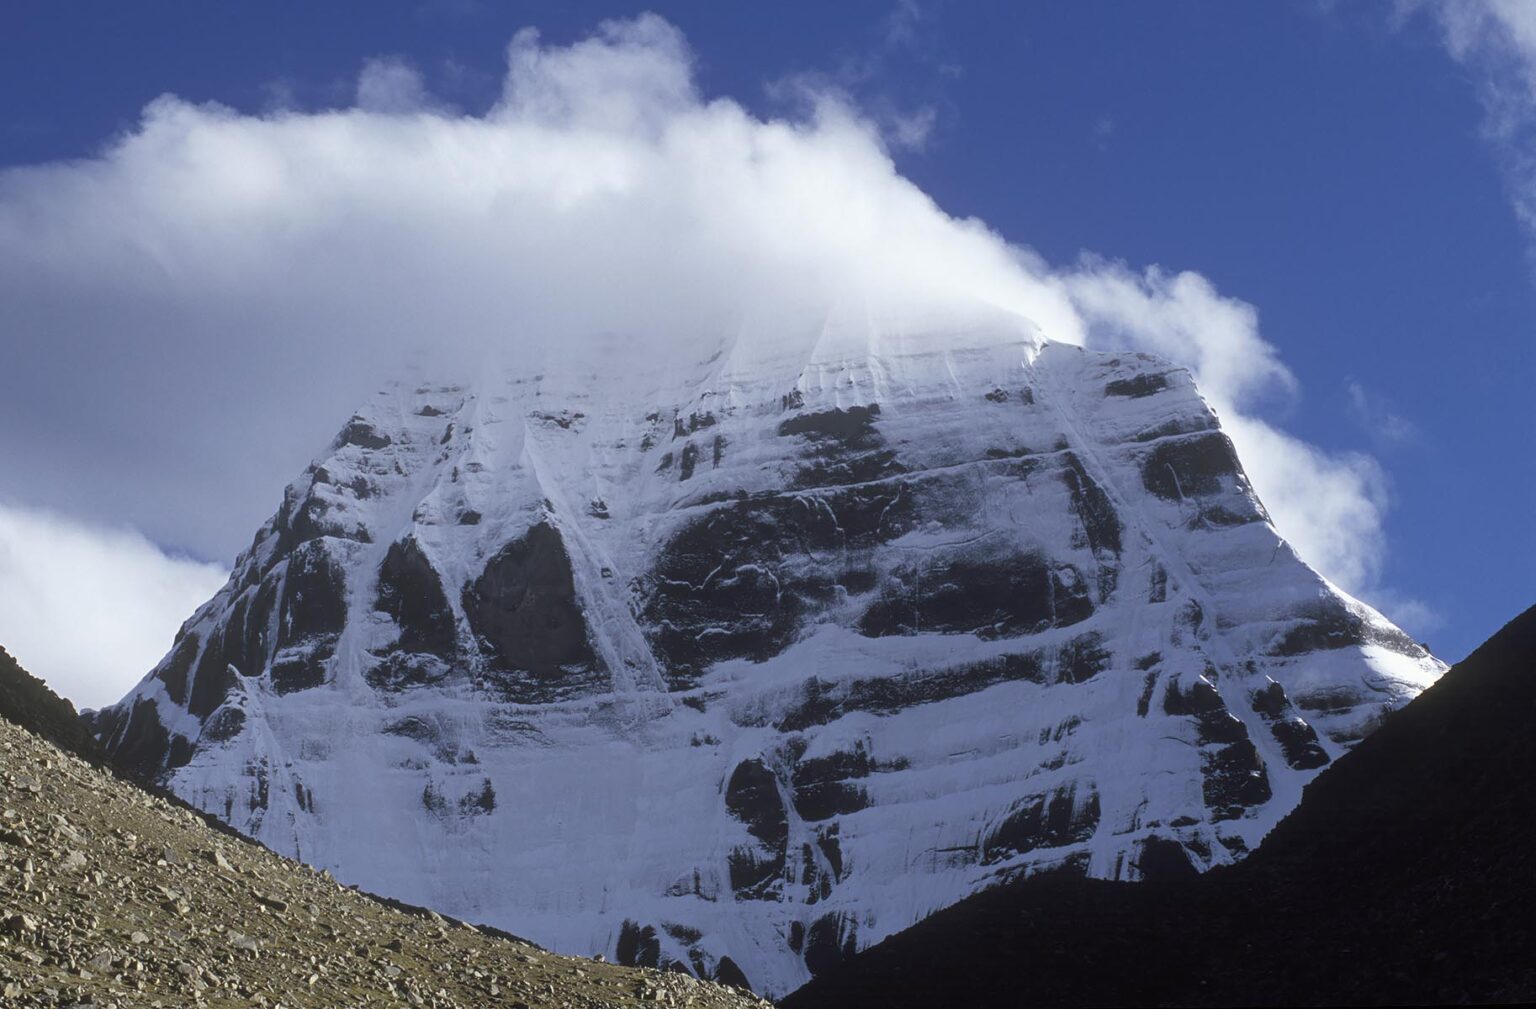 The North face of MOUNT KAILASH (6638 Meters), the most sacred HIMALAYAN PEAK for BUDDHIST and HINDU PILGRIMS - TIBET